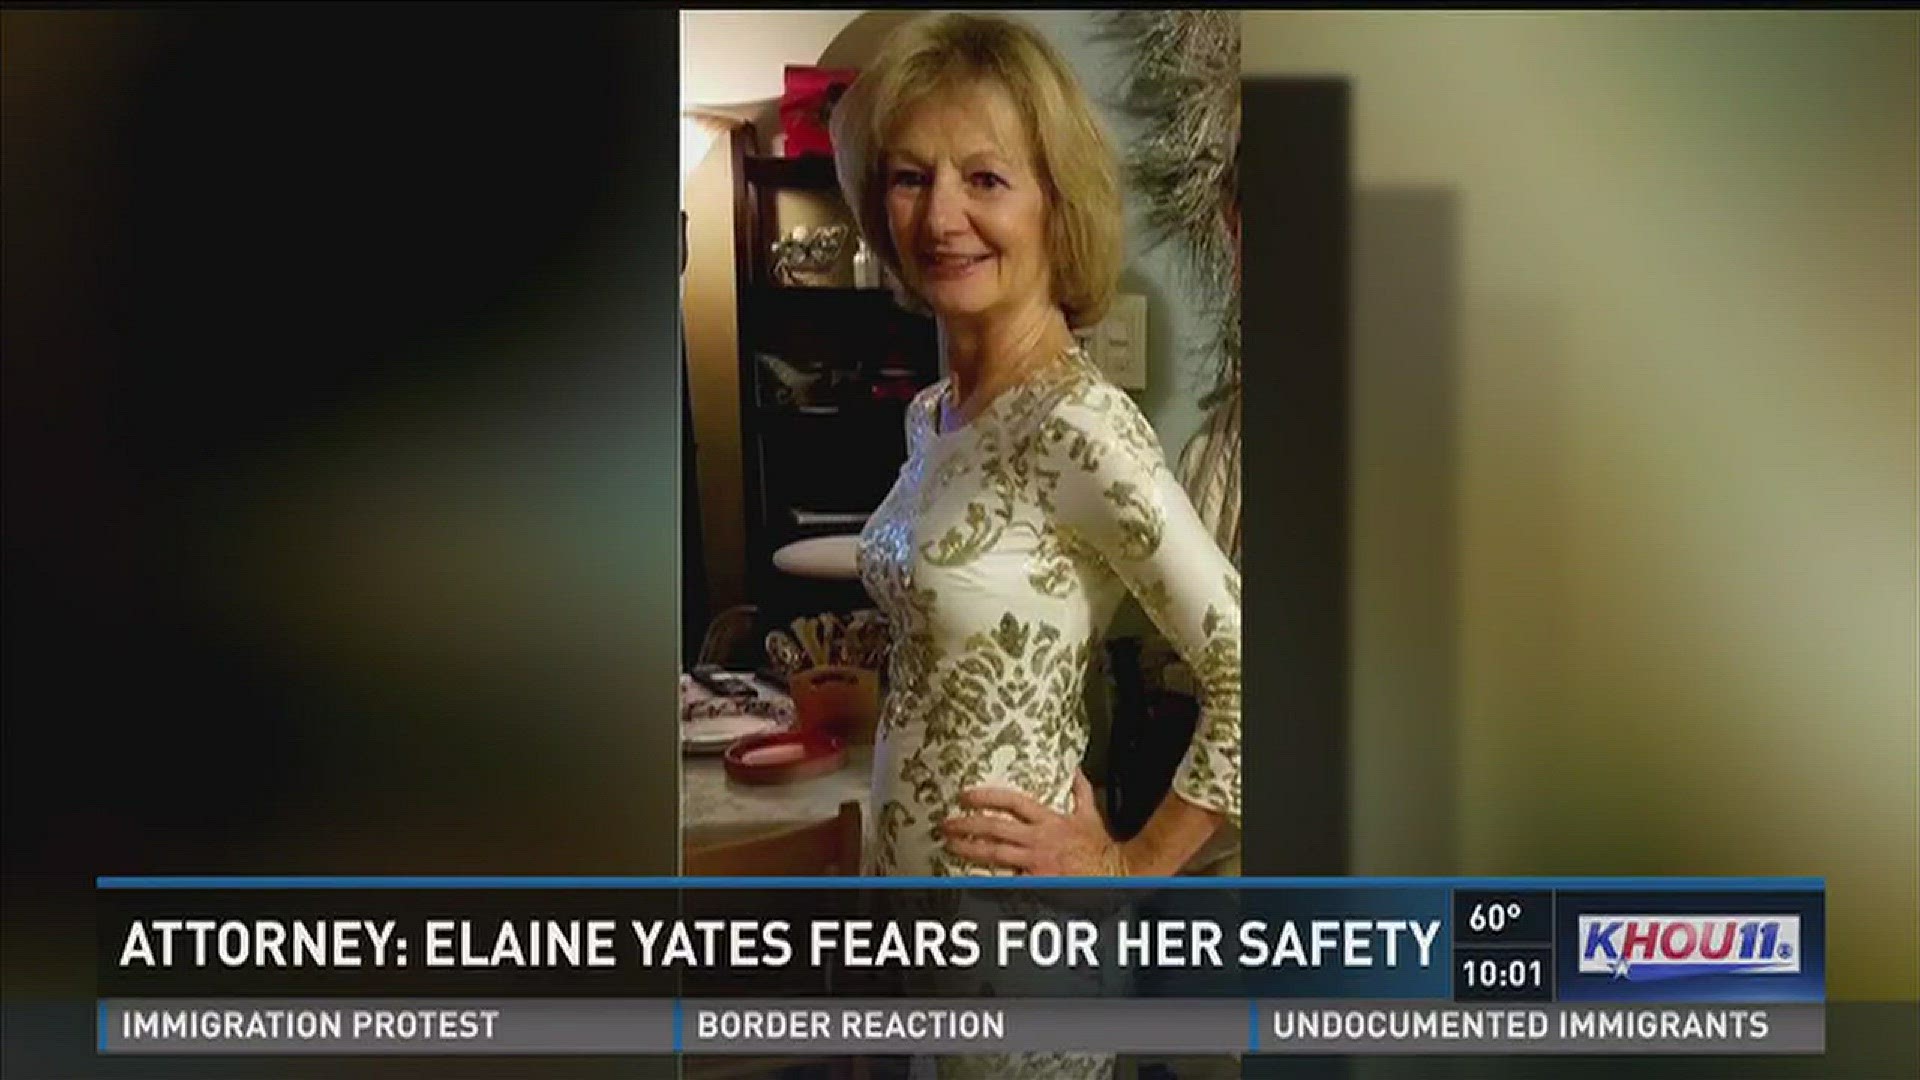 An attorney for Elaine Yates says she had no choice but to leave her home in Rhode Island with her young daughters to escape from an abusive husband, now that her case has gained so much attention she says she and her daughters are in danger again.